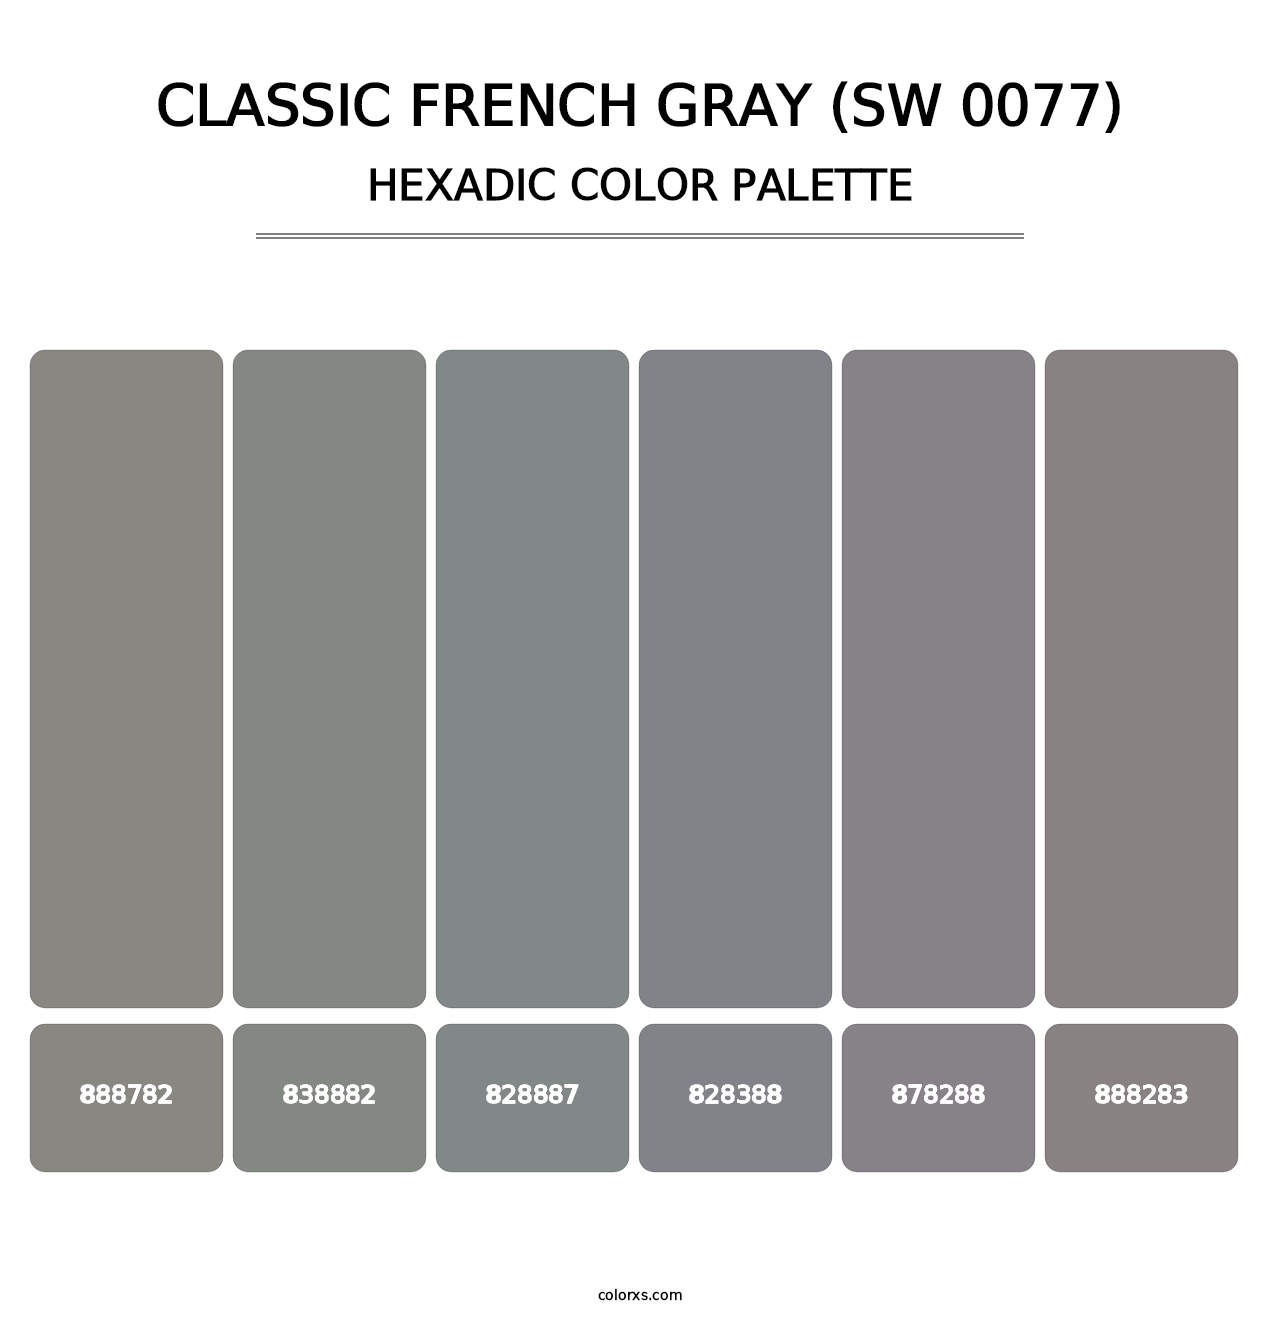 Classic French Gray (SW 0077) - Hexadic Color Palette